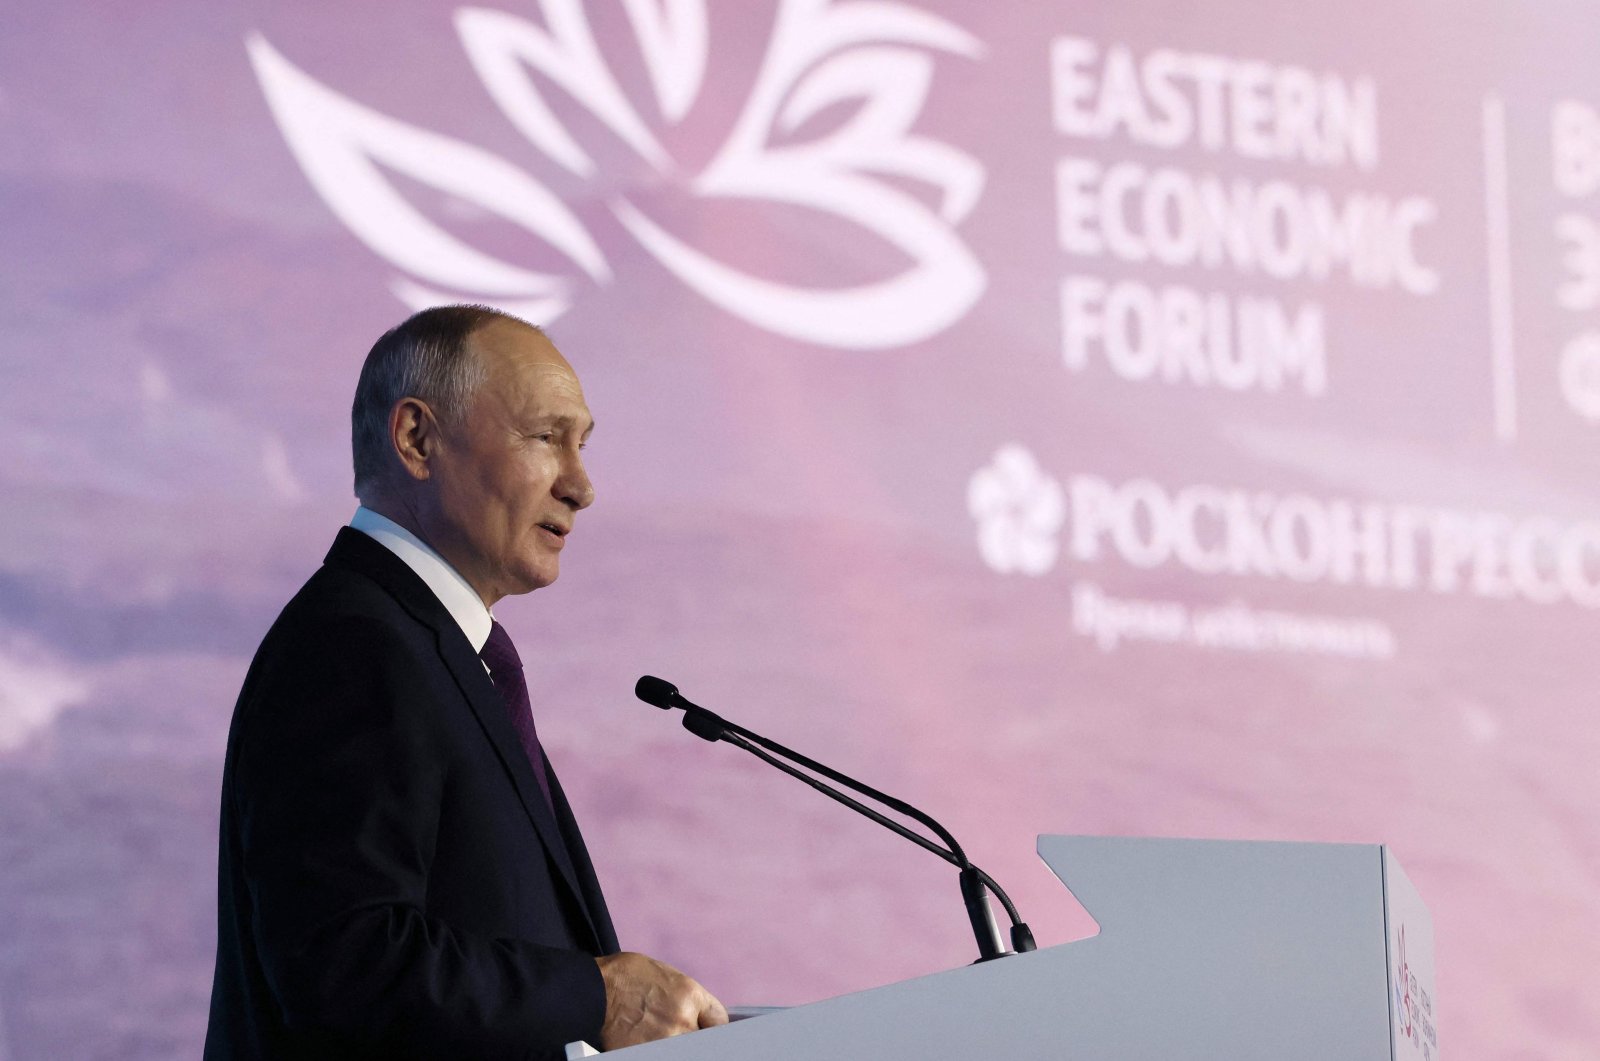 Russia’s Putin expects economic calm, warns of inflation